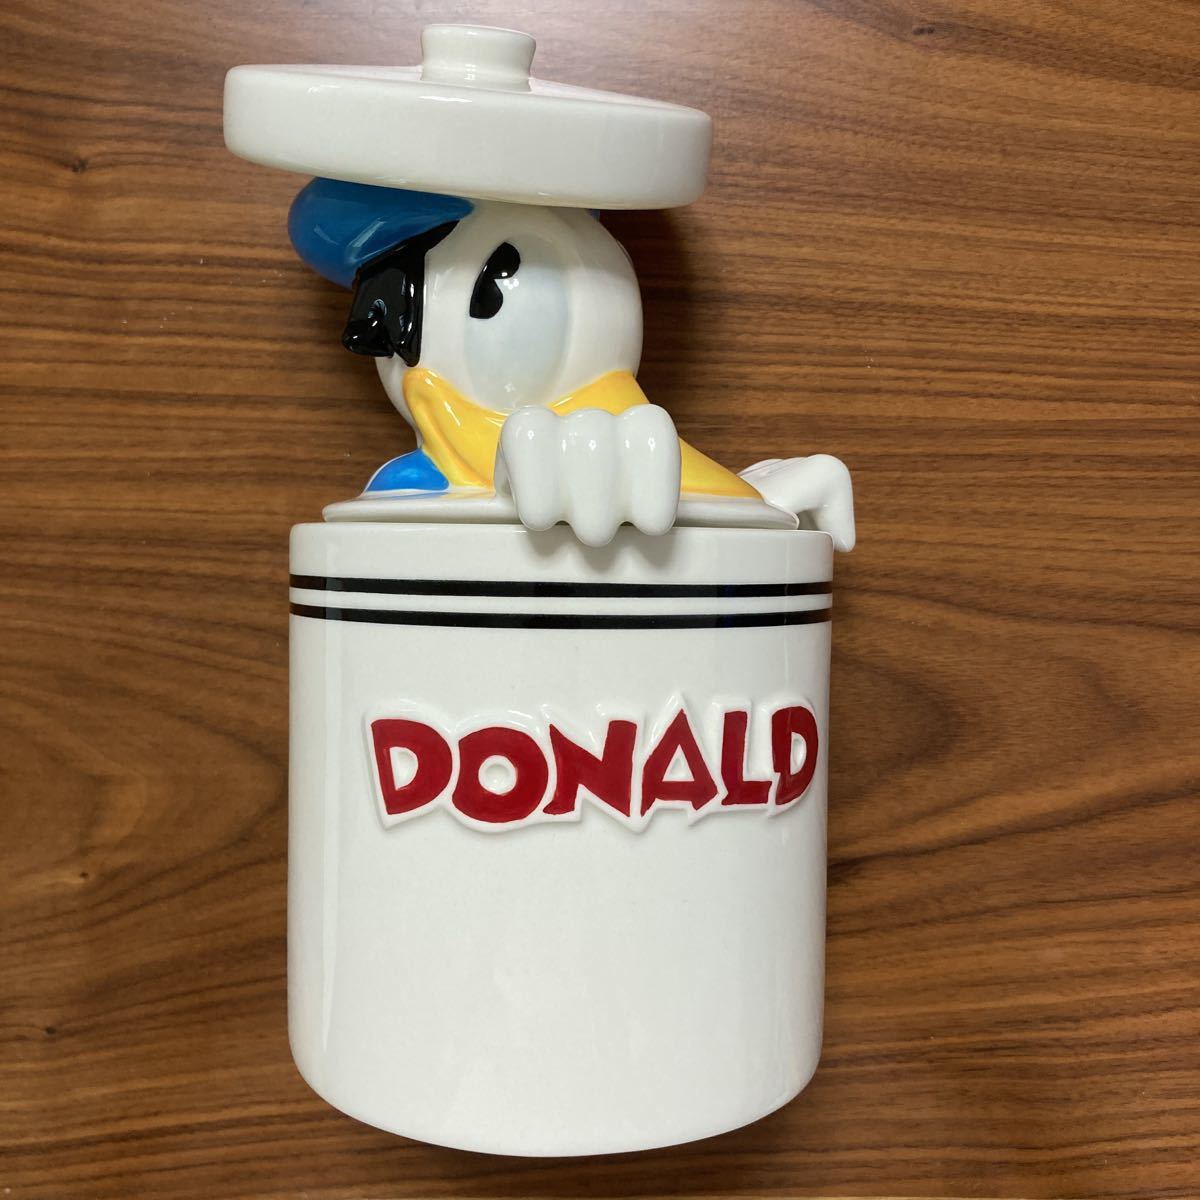  Disney used Donald Duck cookie ja- ceramics figure extra-large big size inserting thing ornament 